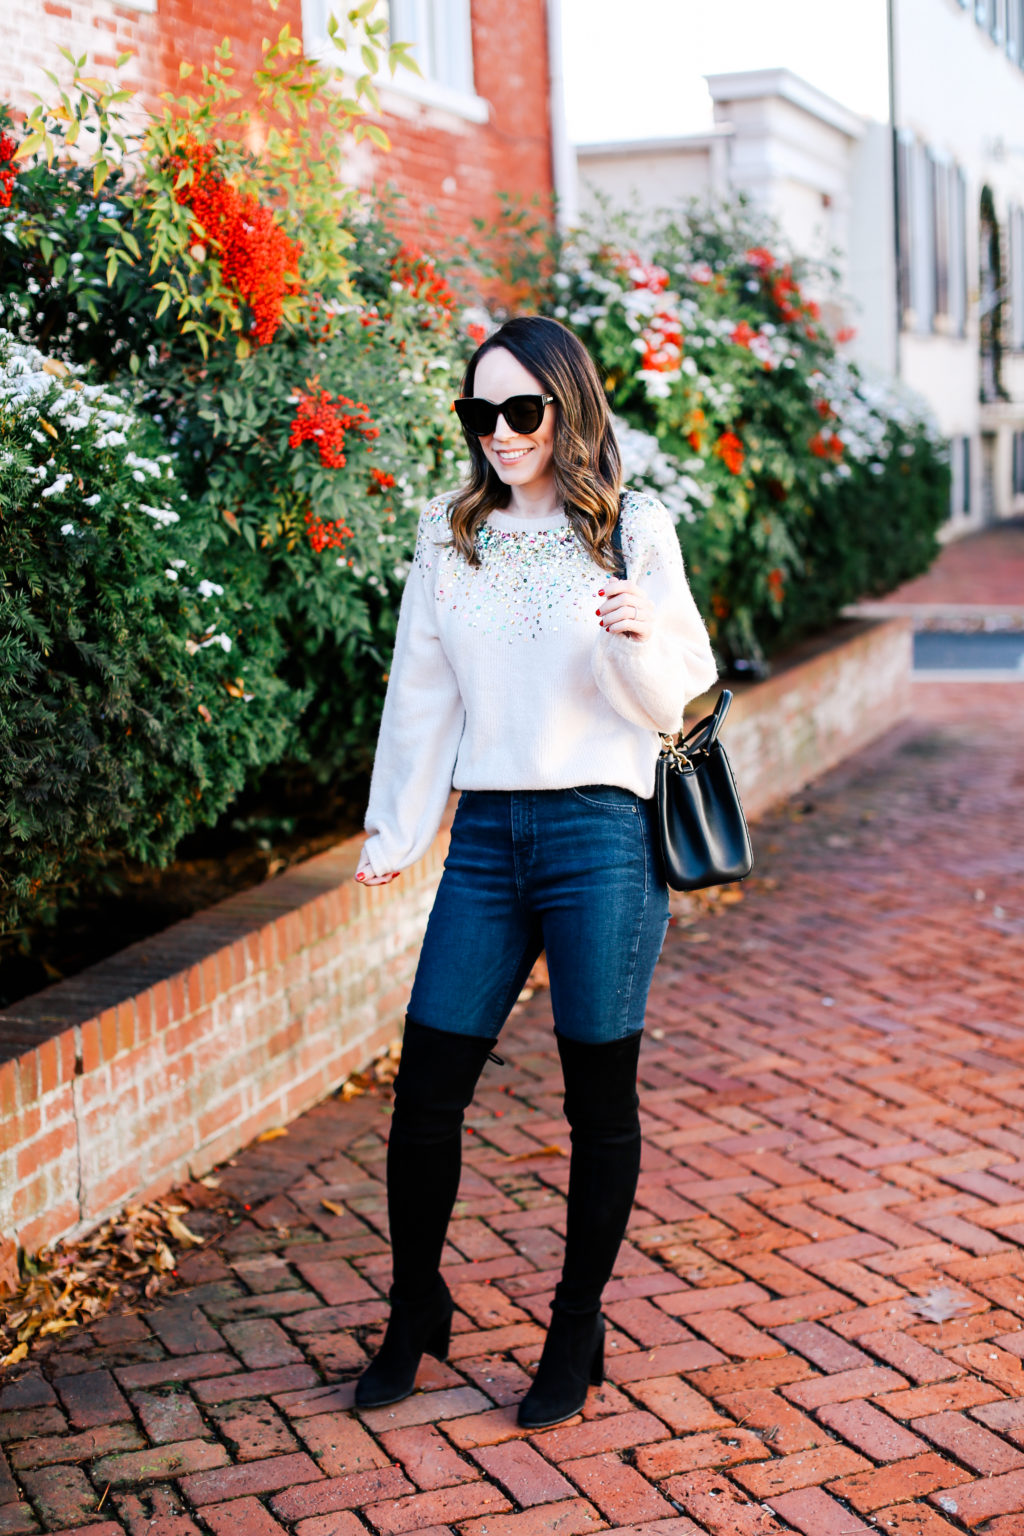 Casually Festive (The Cutest Sequin Sweater for Under $50!) - alittlebitetc